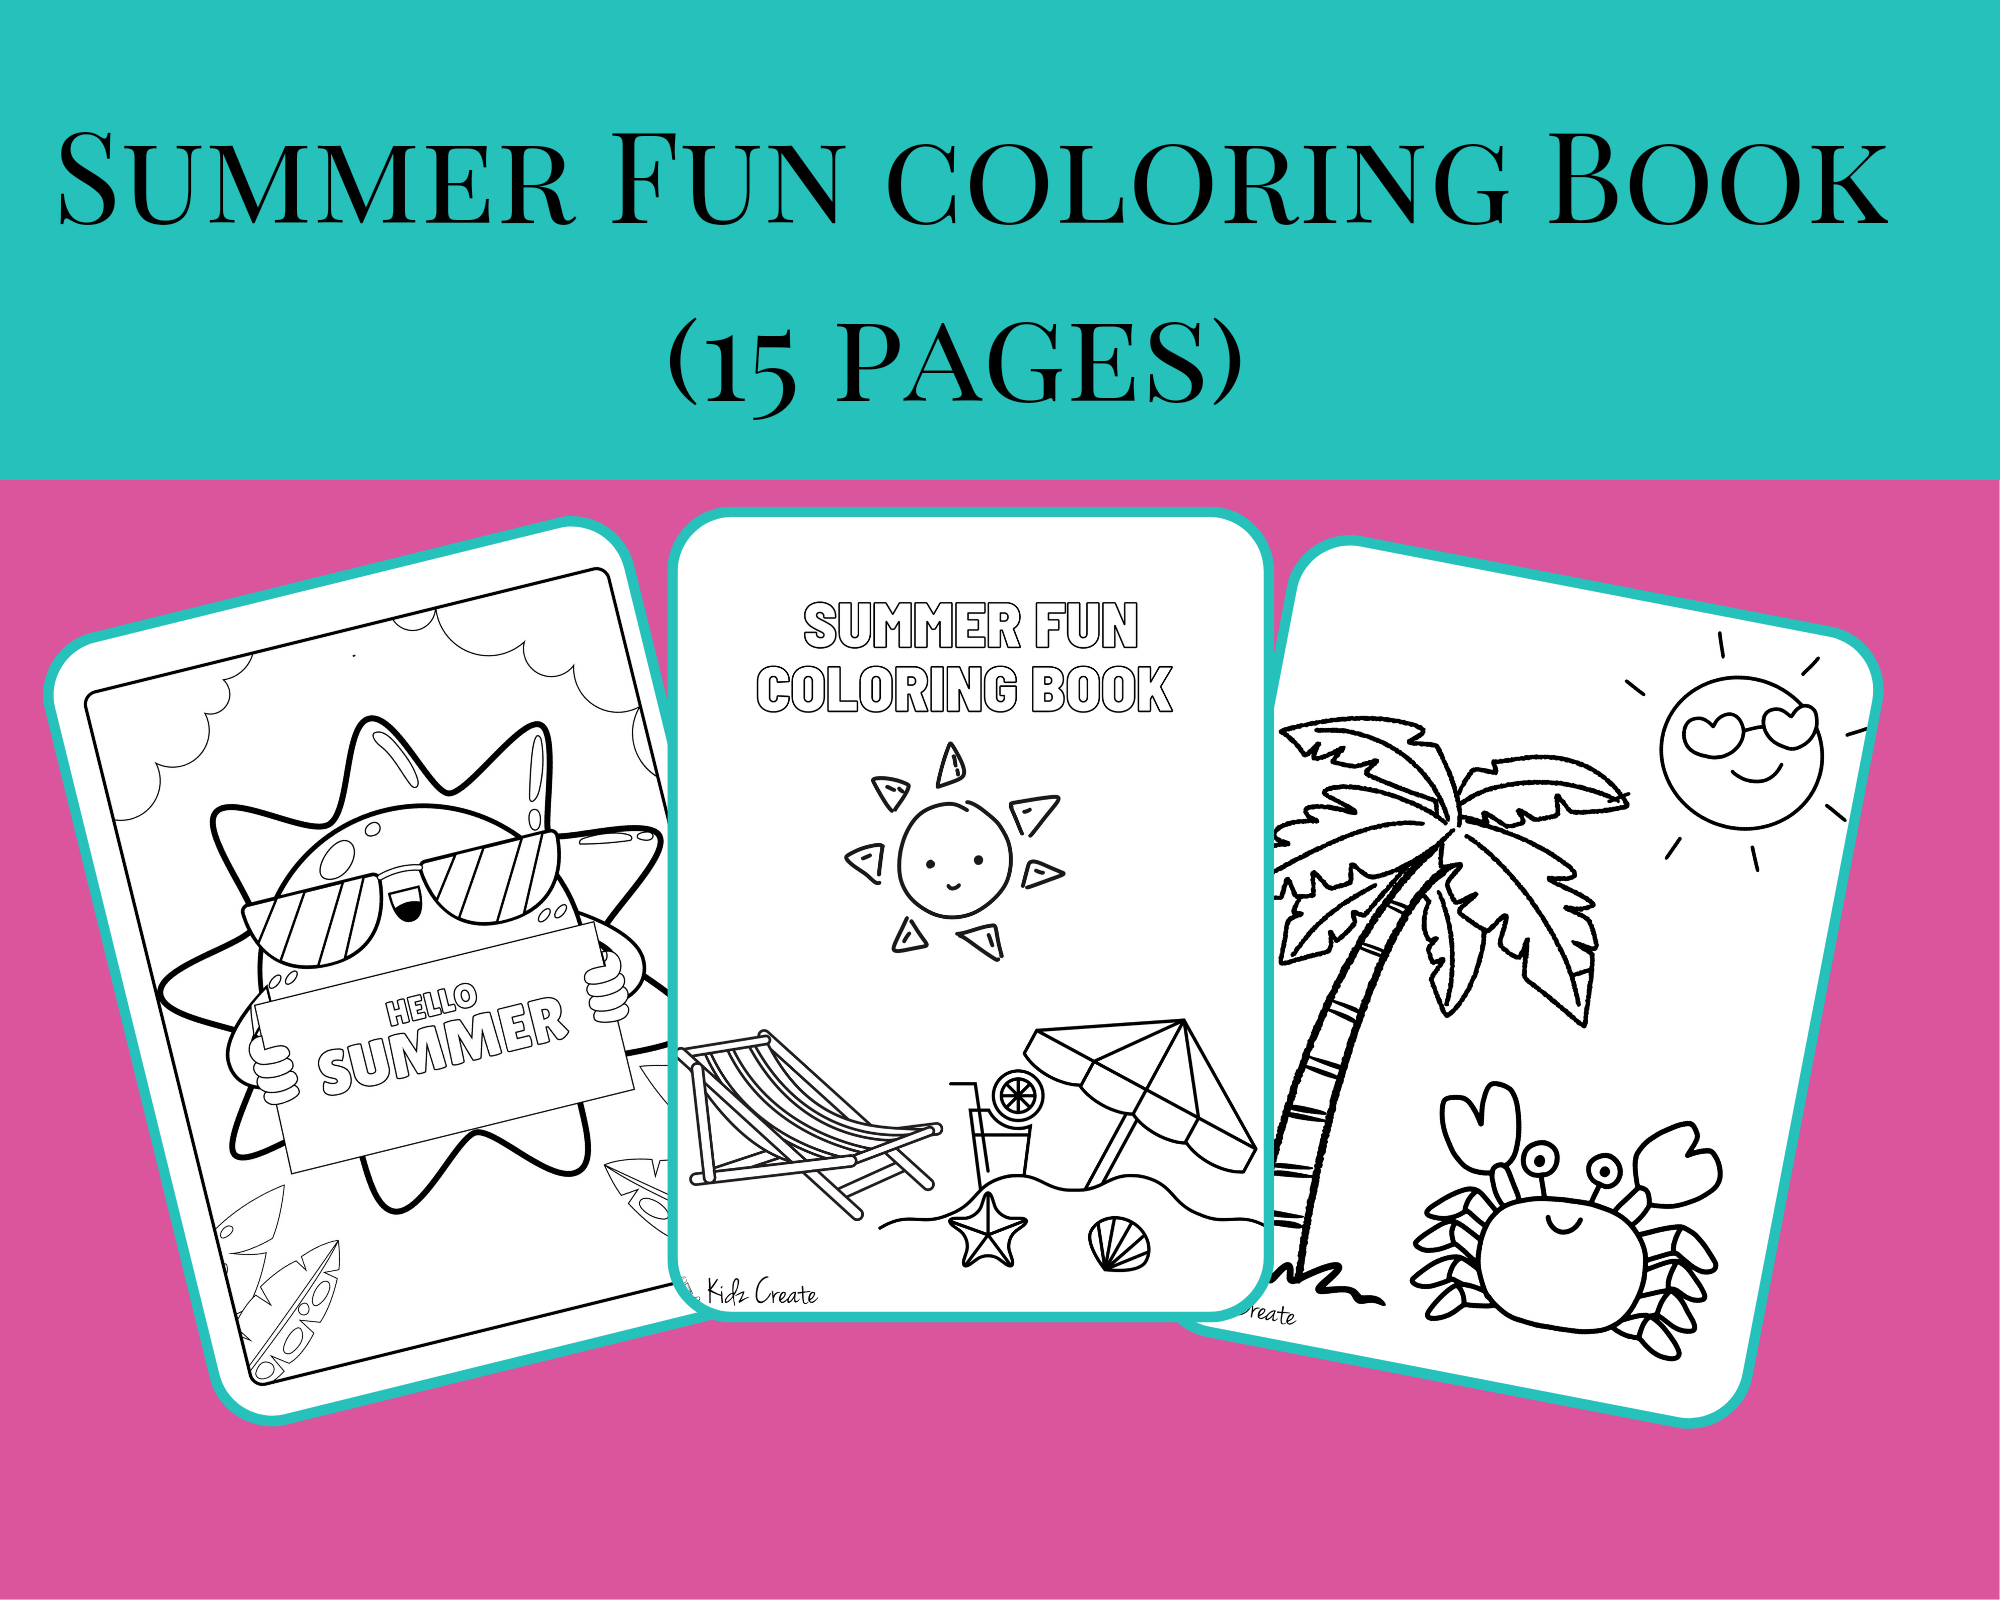 Summer fun coloring book for kids pages